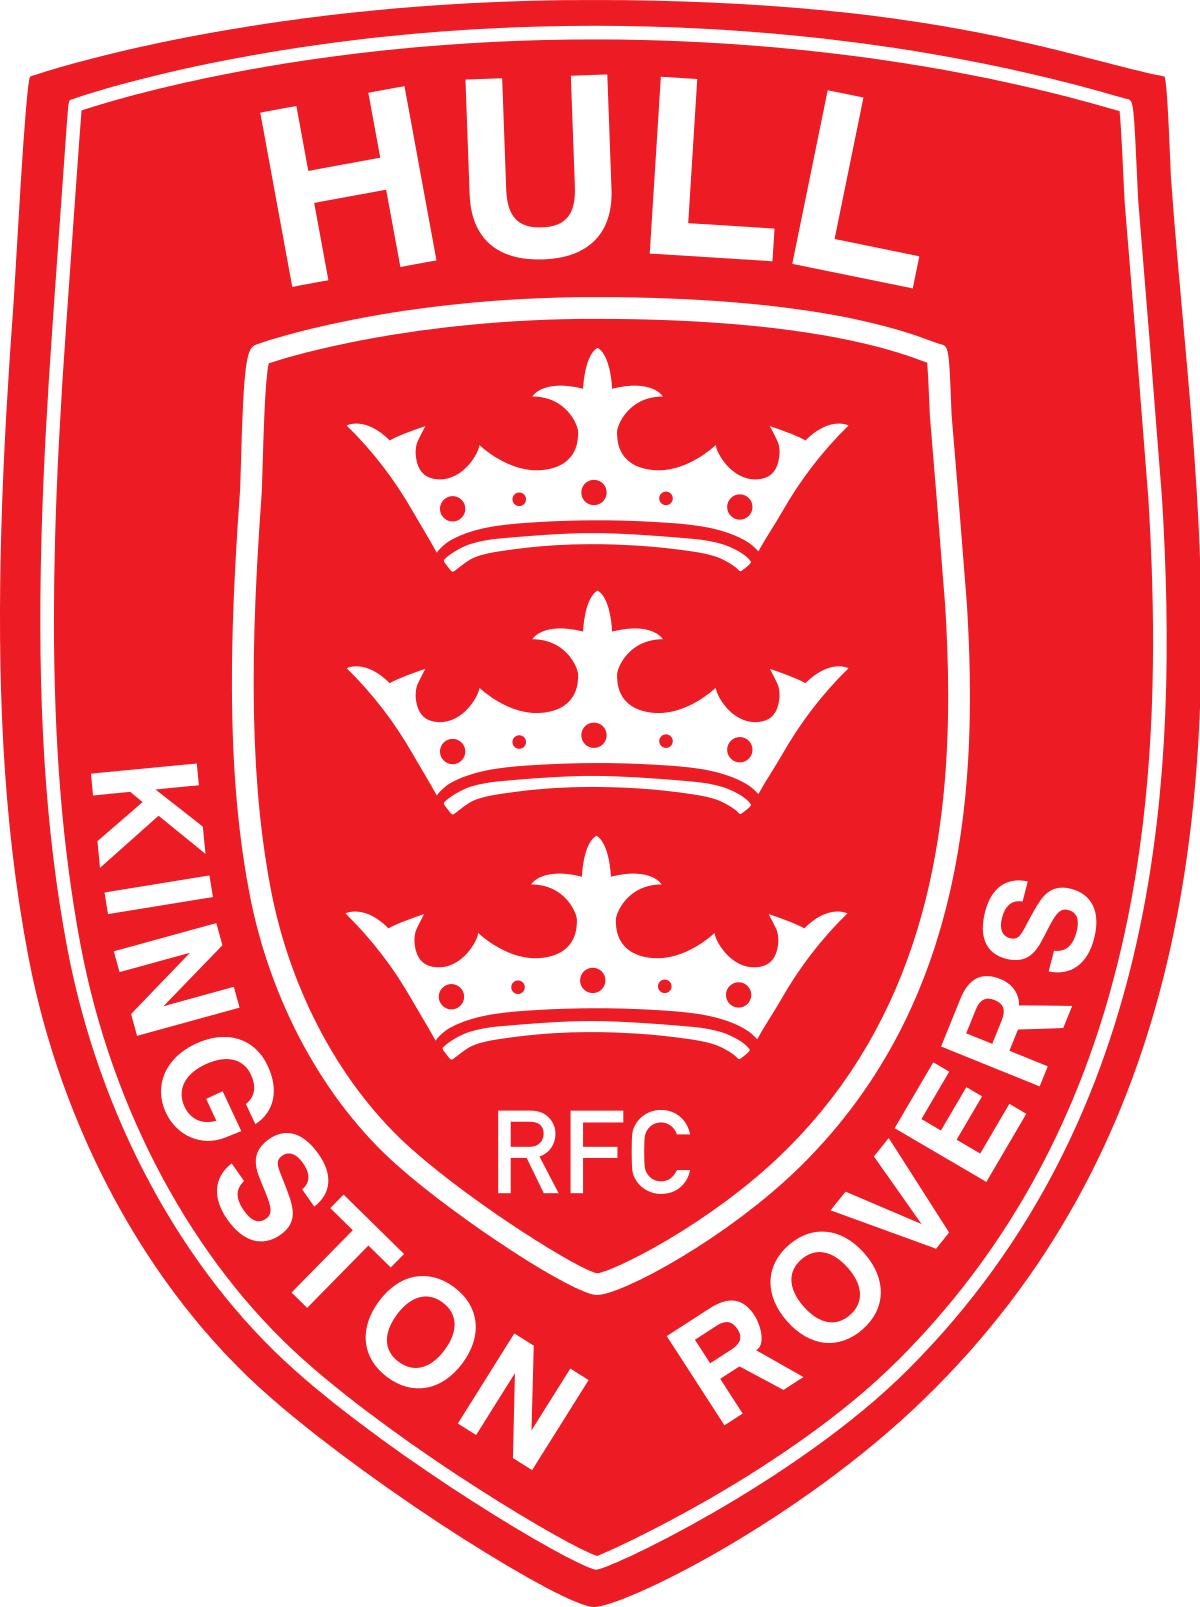 We're official platinum partners of Hull KR.